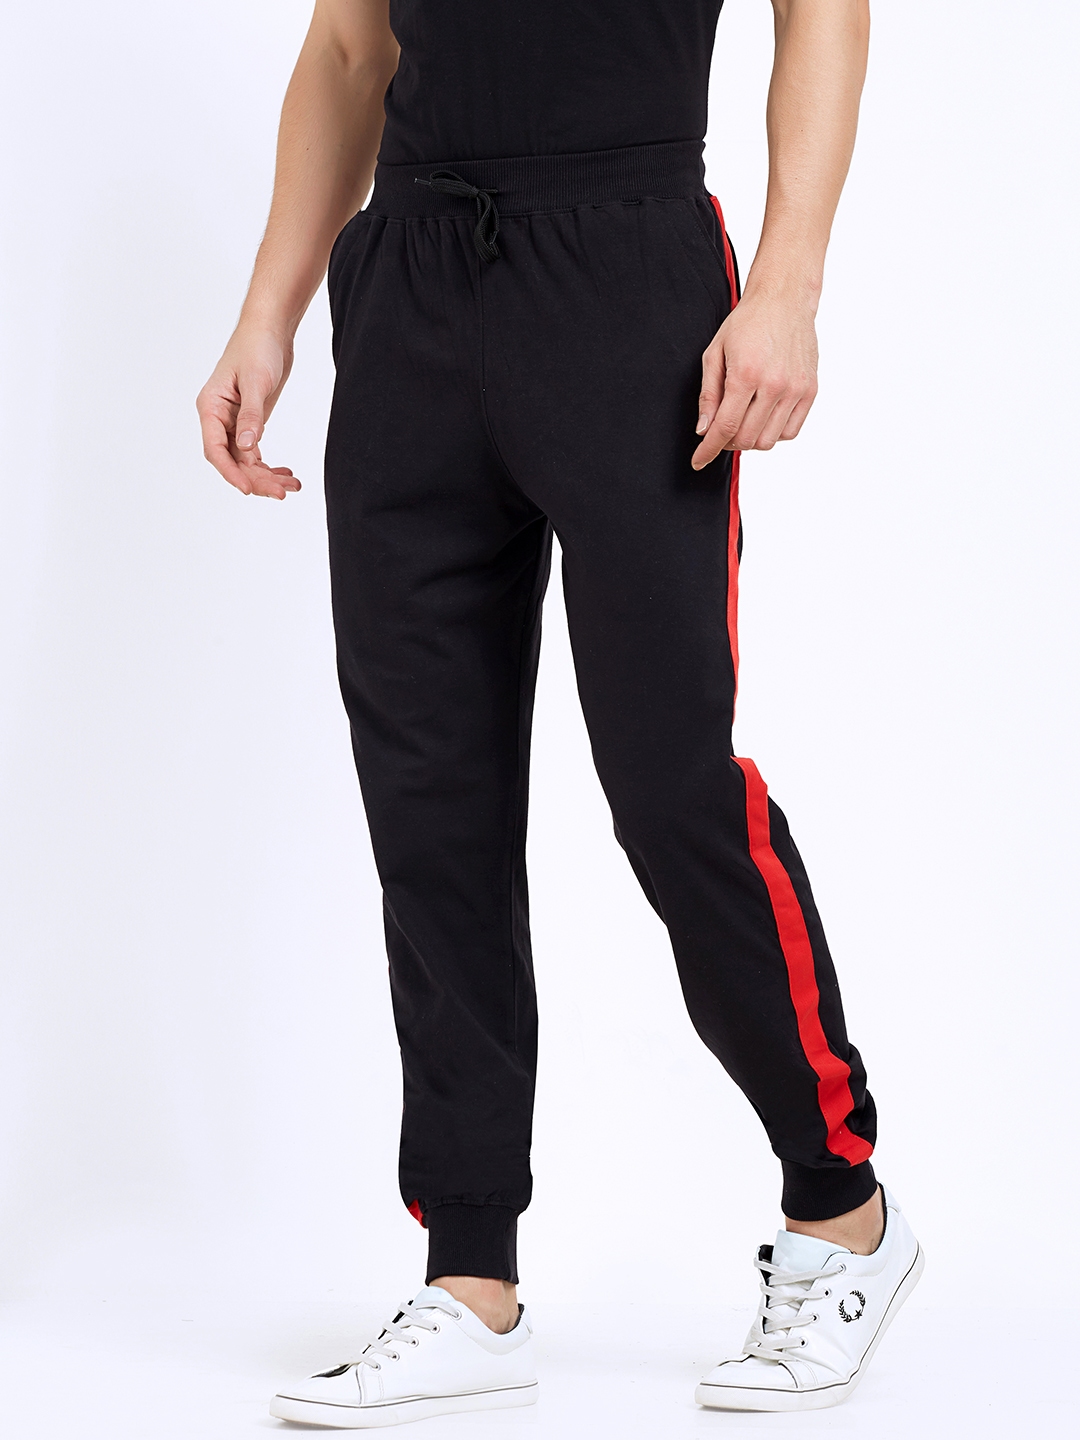 black track pants with red stripe mens